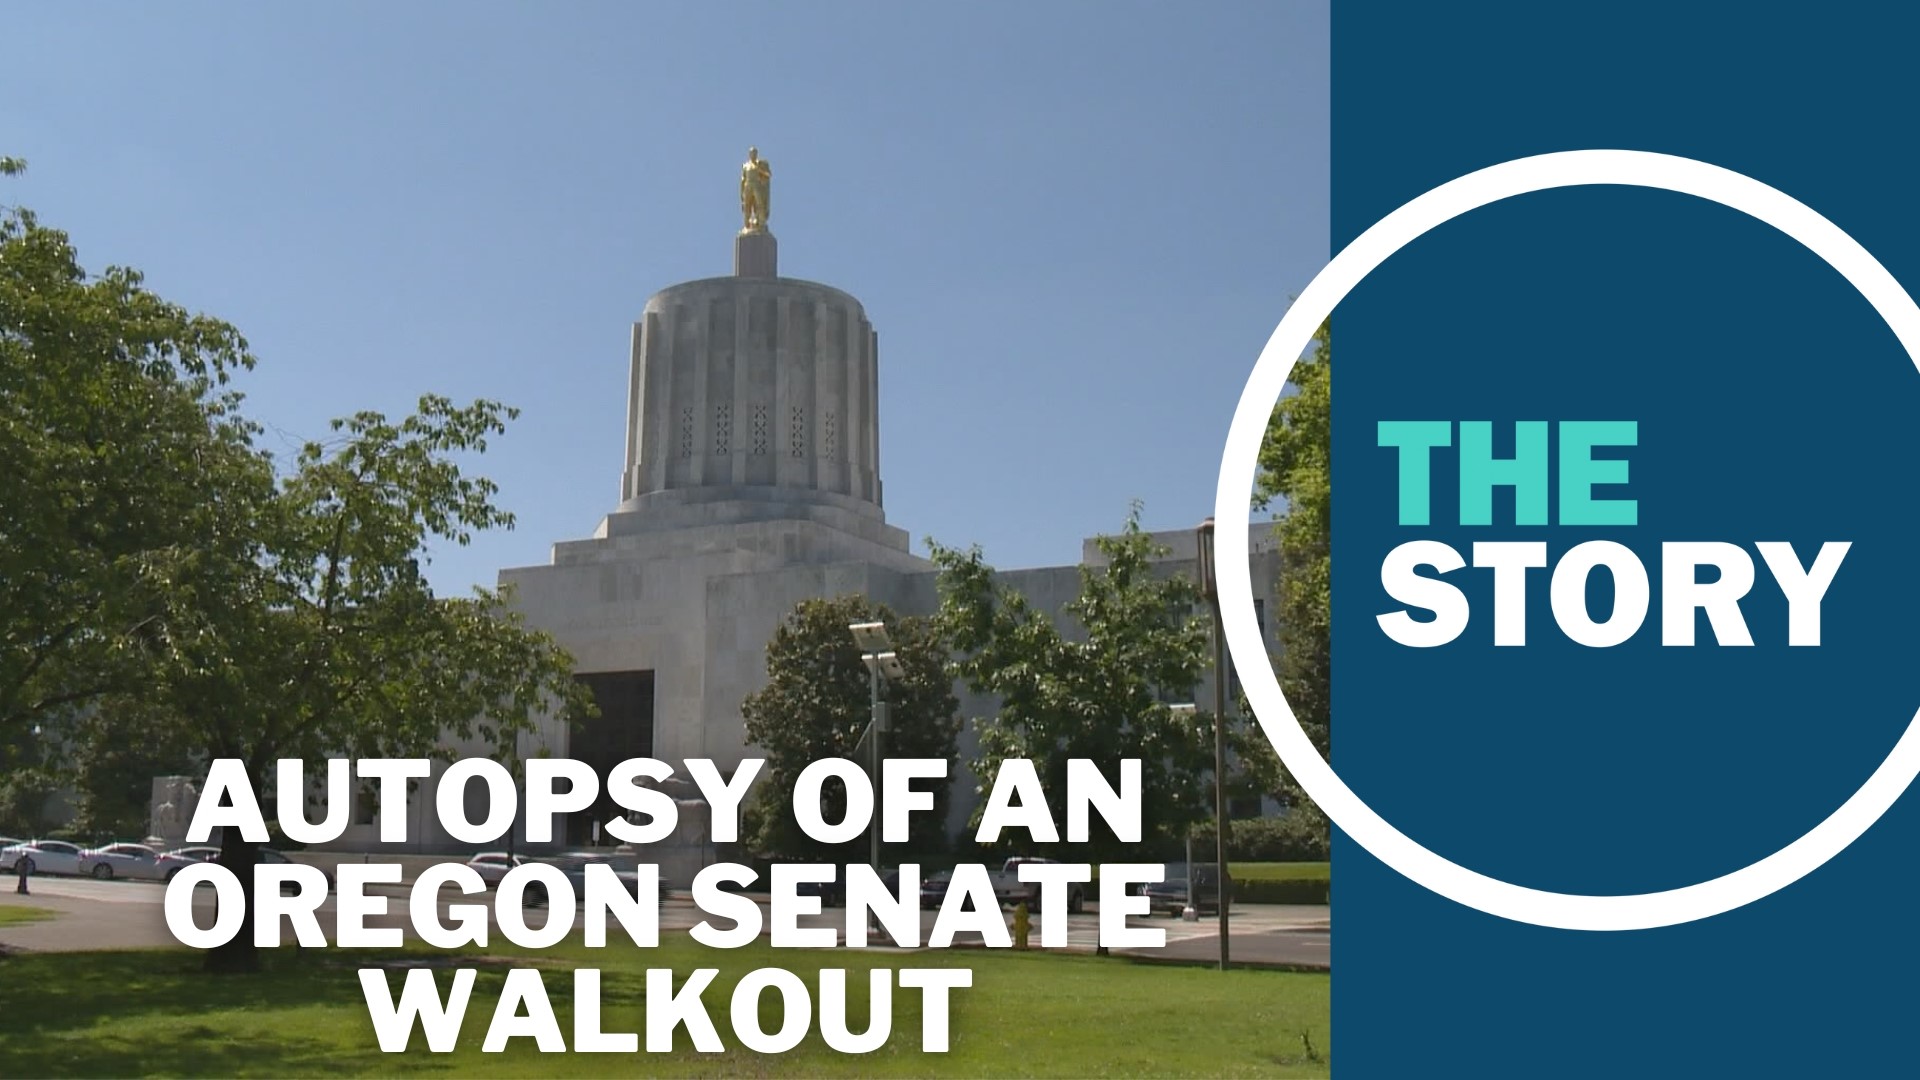 After the longest walkout in Oregon history, we checked in with some legislative veterans to get their take on the minority party strategy of hitting the bricks.